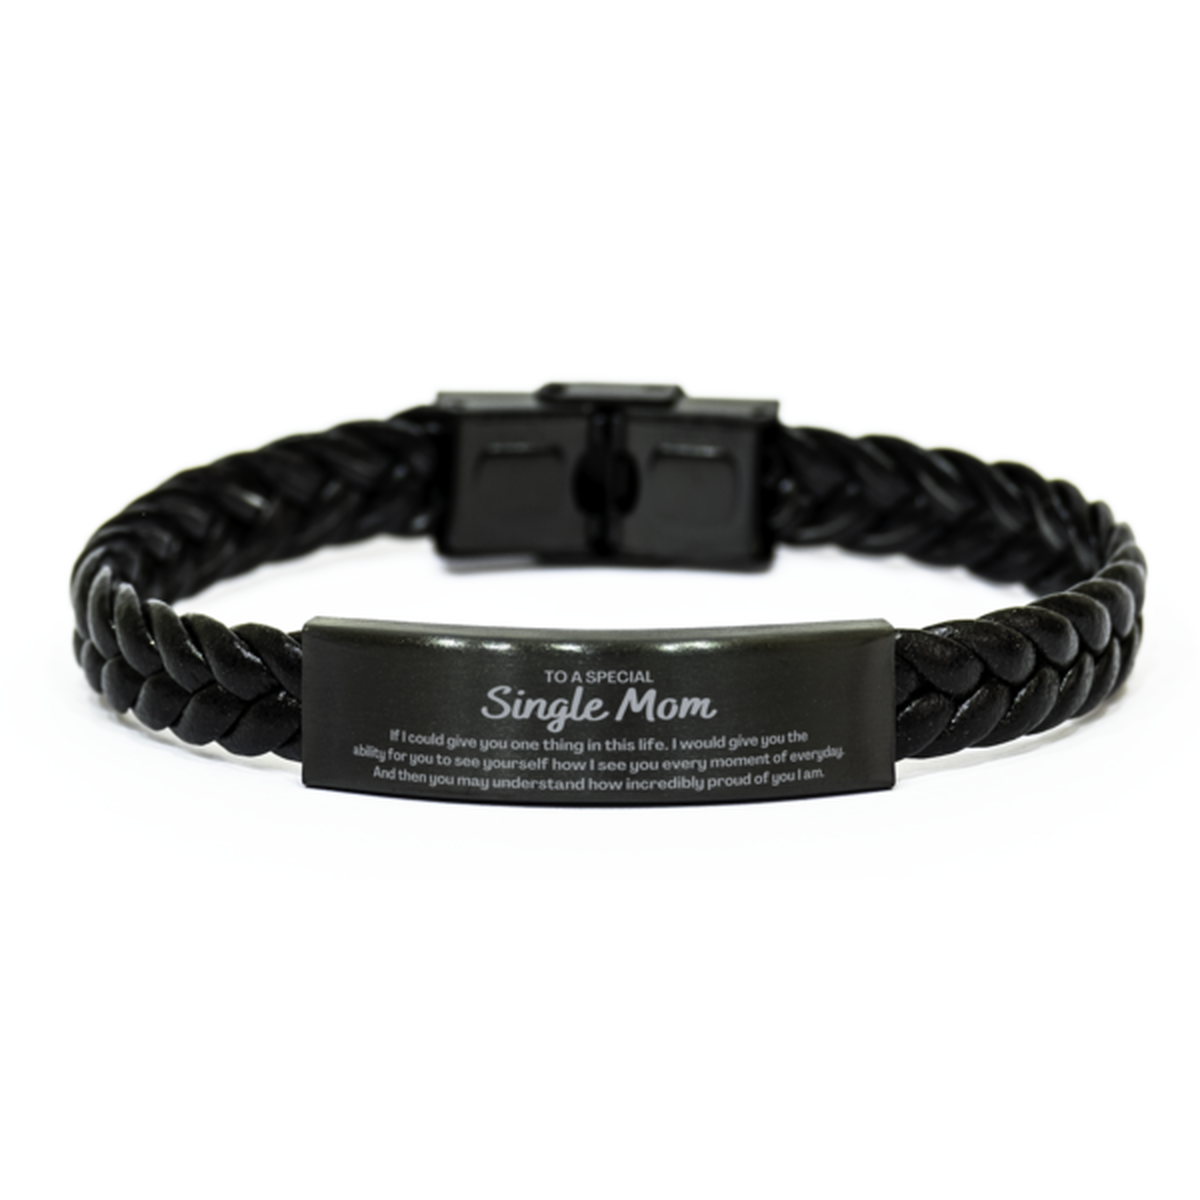 To My Single Mom Braided Leather Bracelet, Gifts For Single Mom Engraved, Inspirational Gifts for Christmas Birthday, Epic Gifts for Single Mom To A Special Single Mom how incredibly proud of you I am